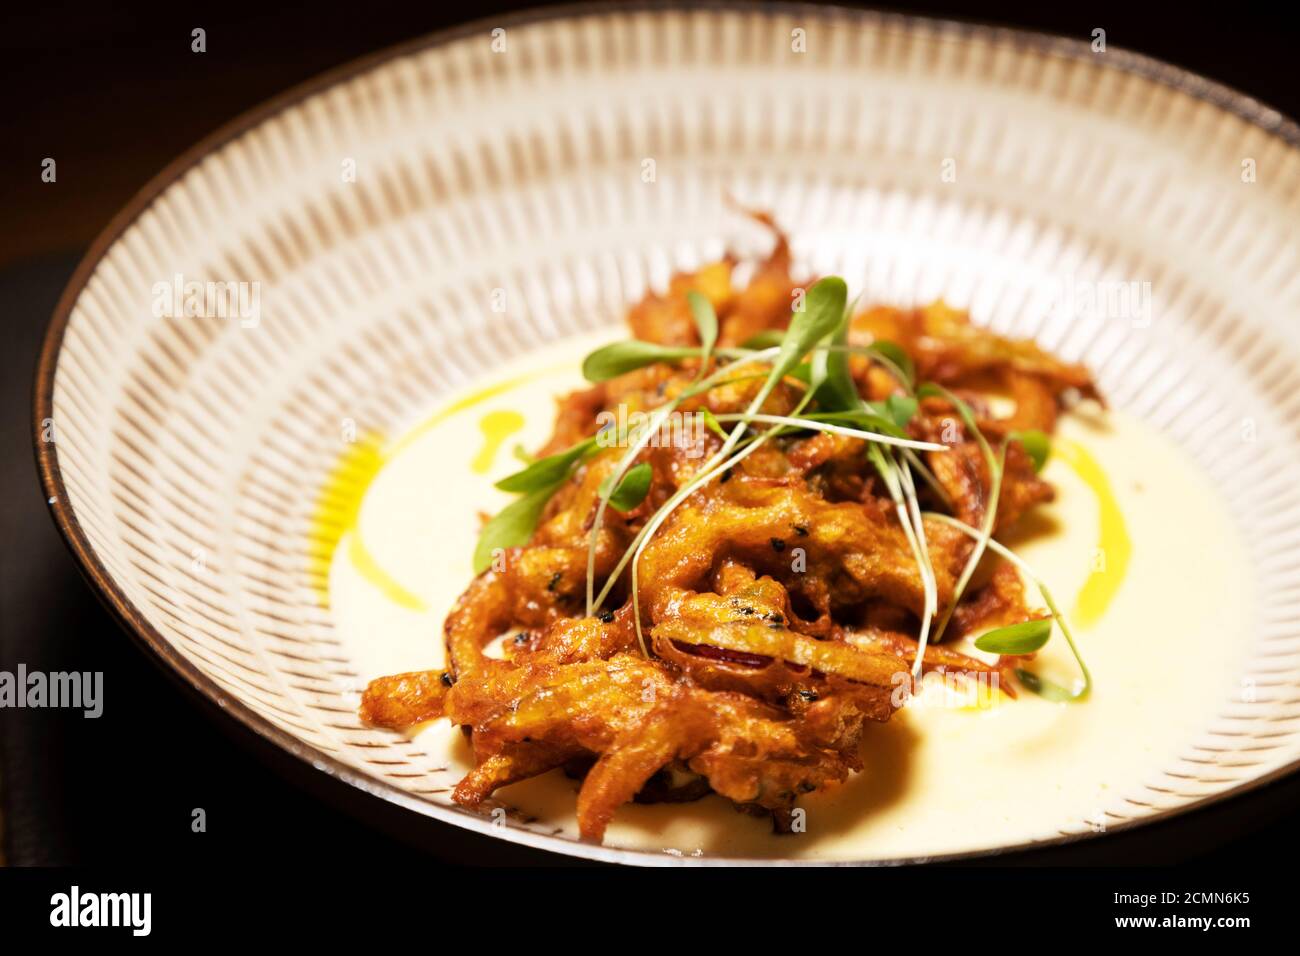 Onion bhaji made with spring onion. The bhaji is served with a smoked cheese sauce. Stock Photo